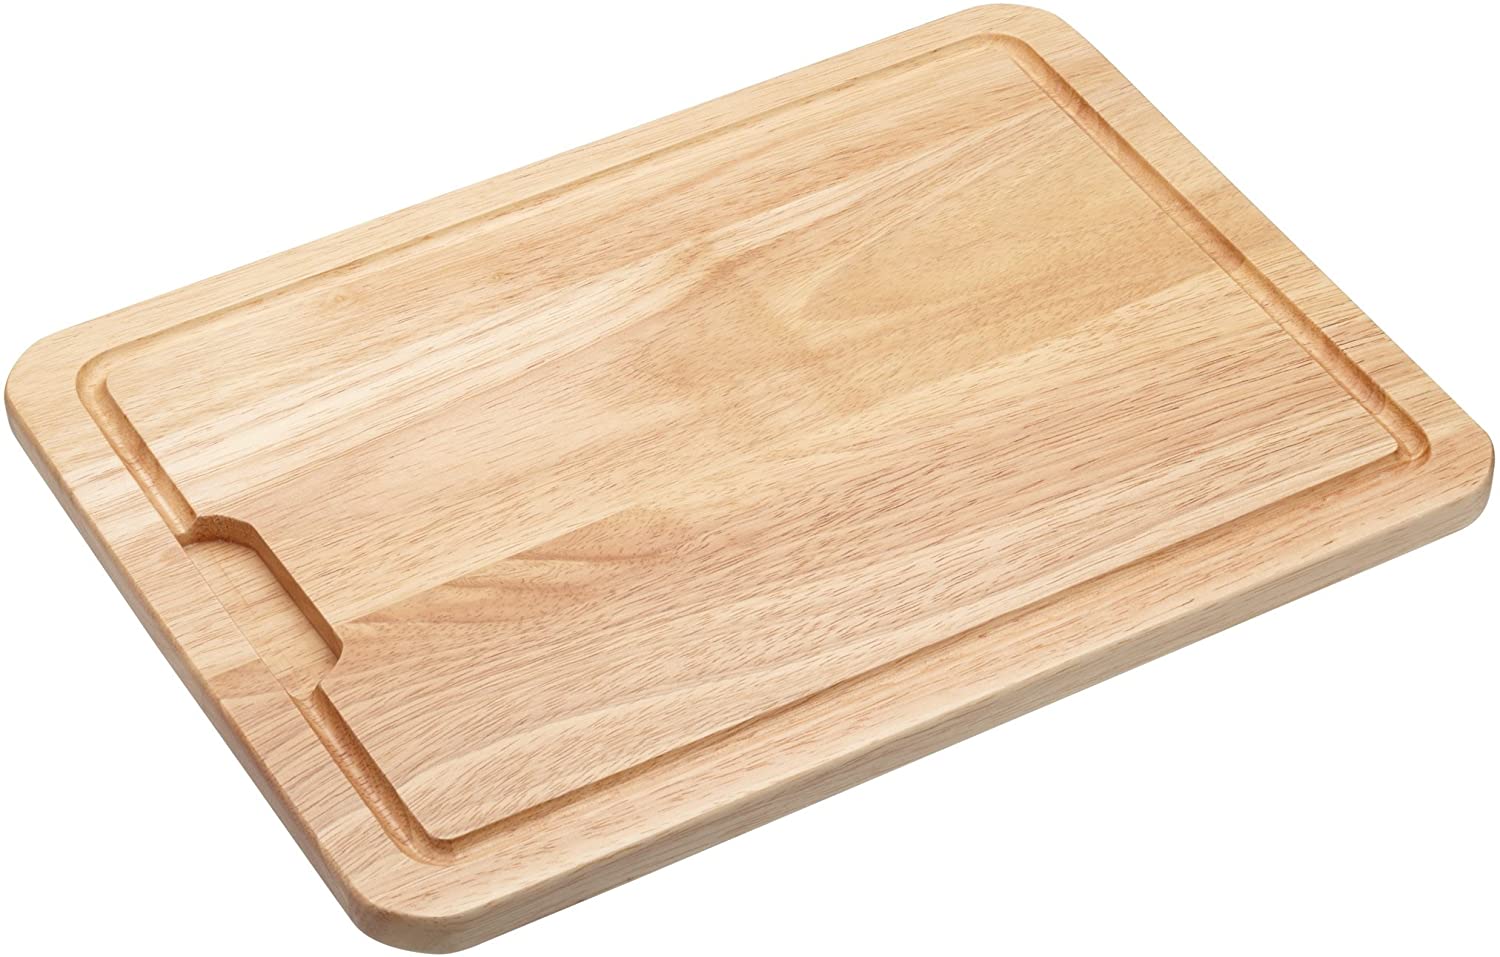 Kitchen Craft Wooden Chopping Board - Large